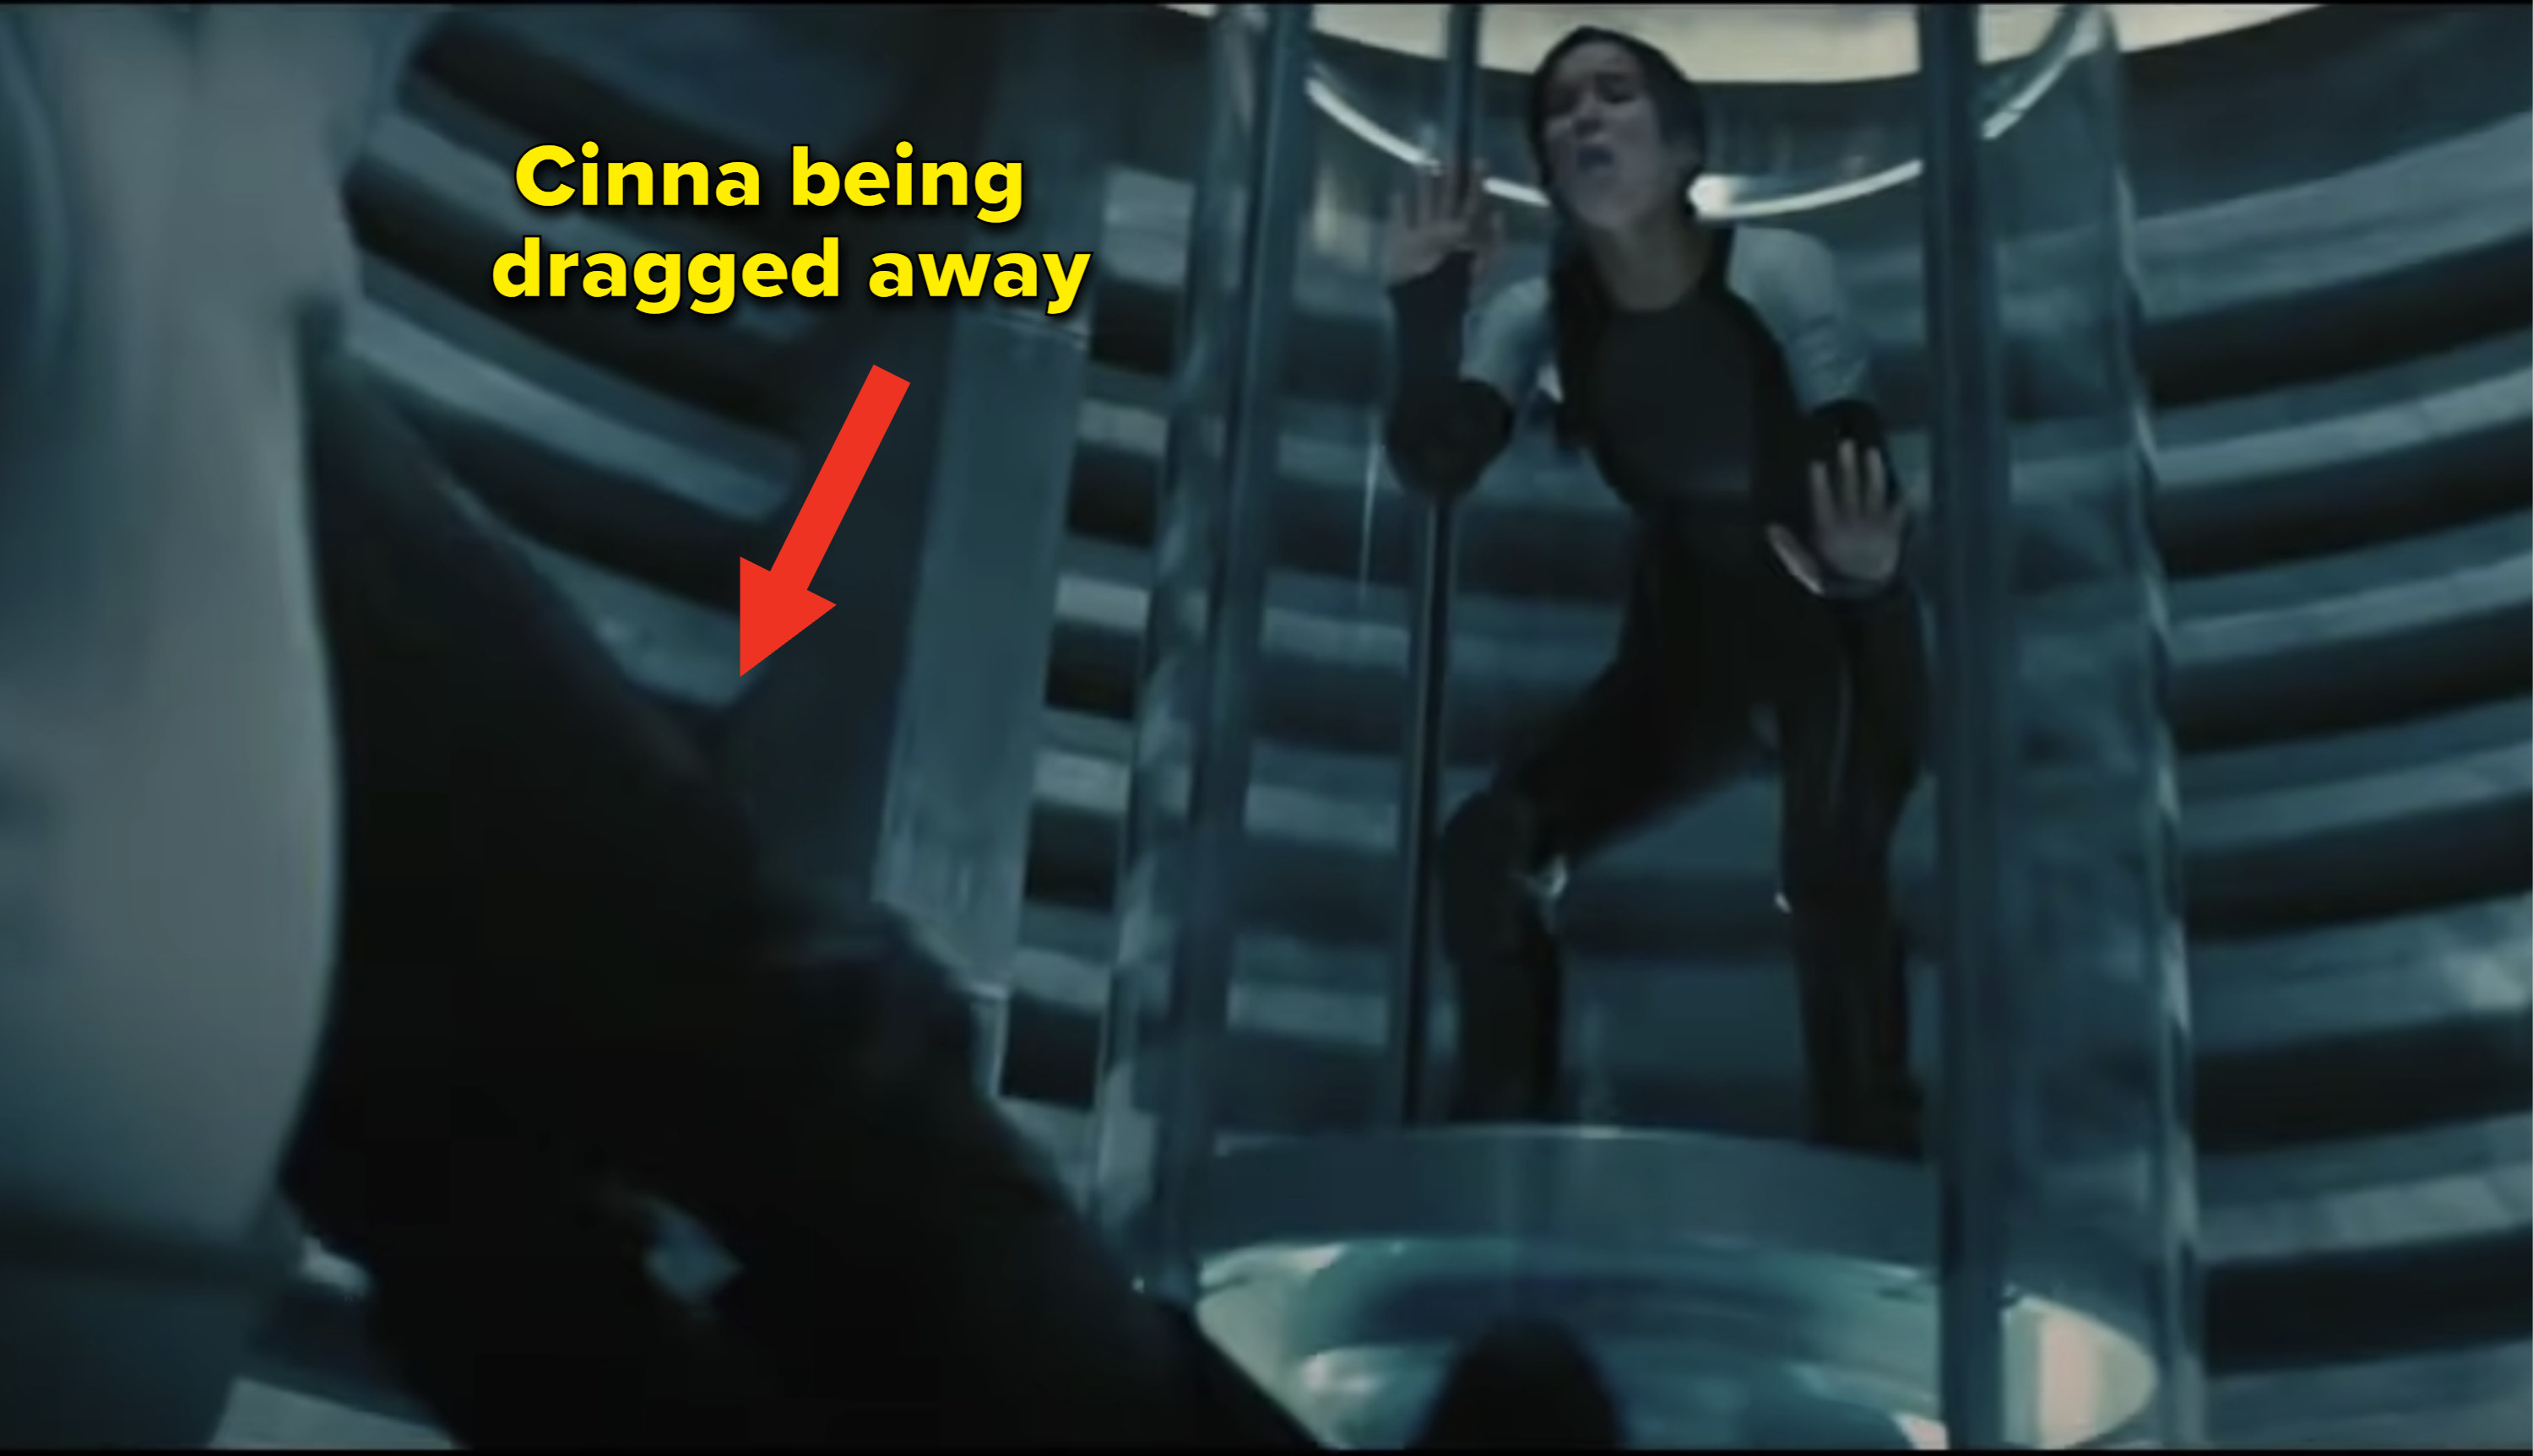 Katniss screaming out for Cinna as he is dragged away by guards